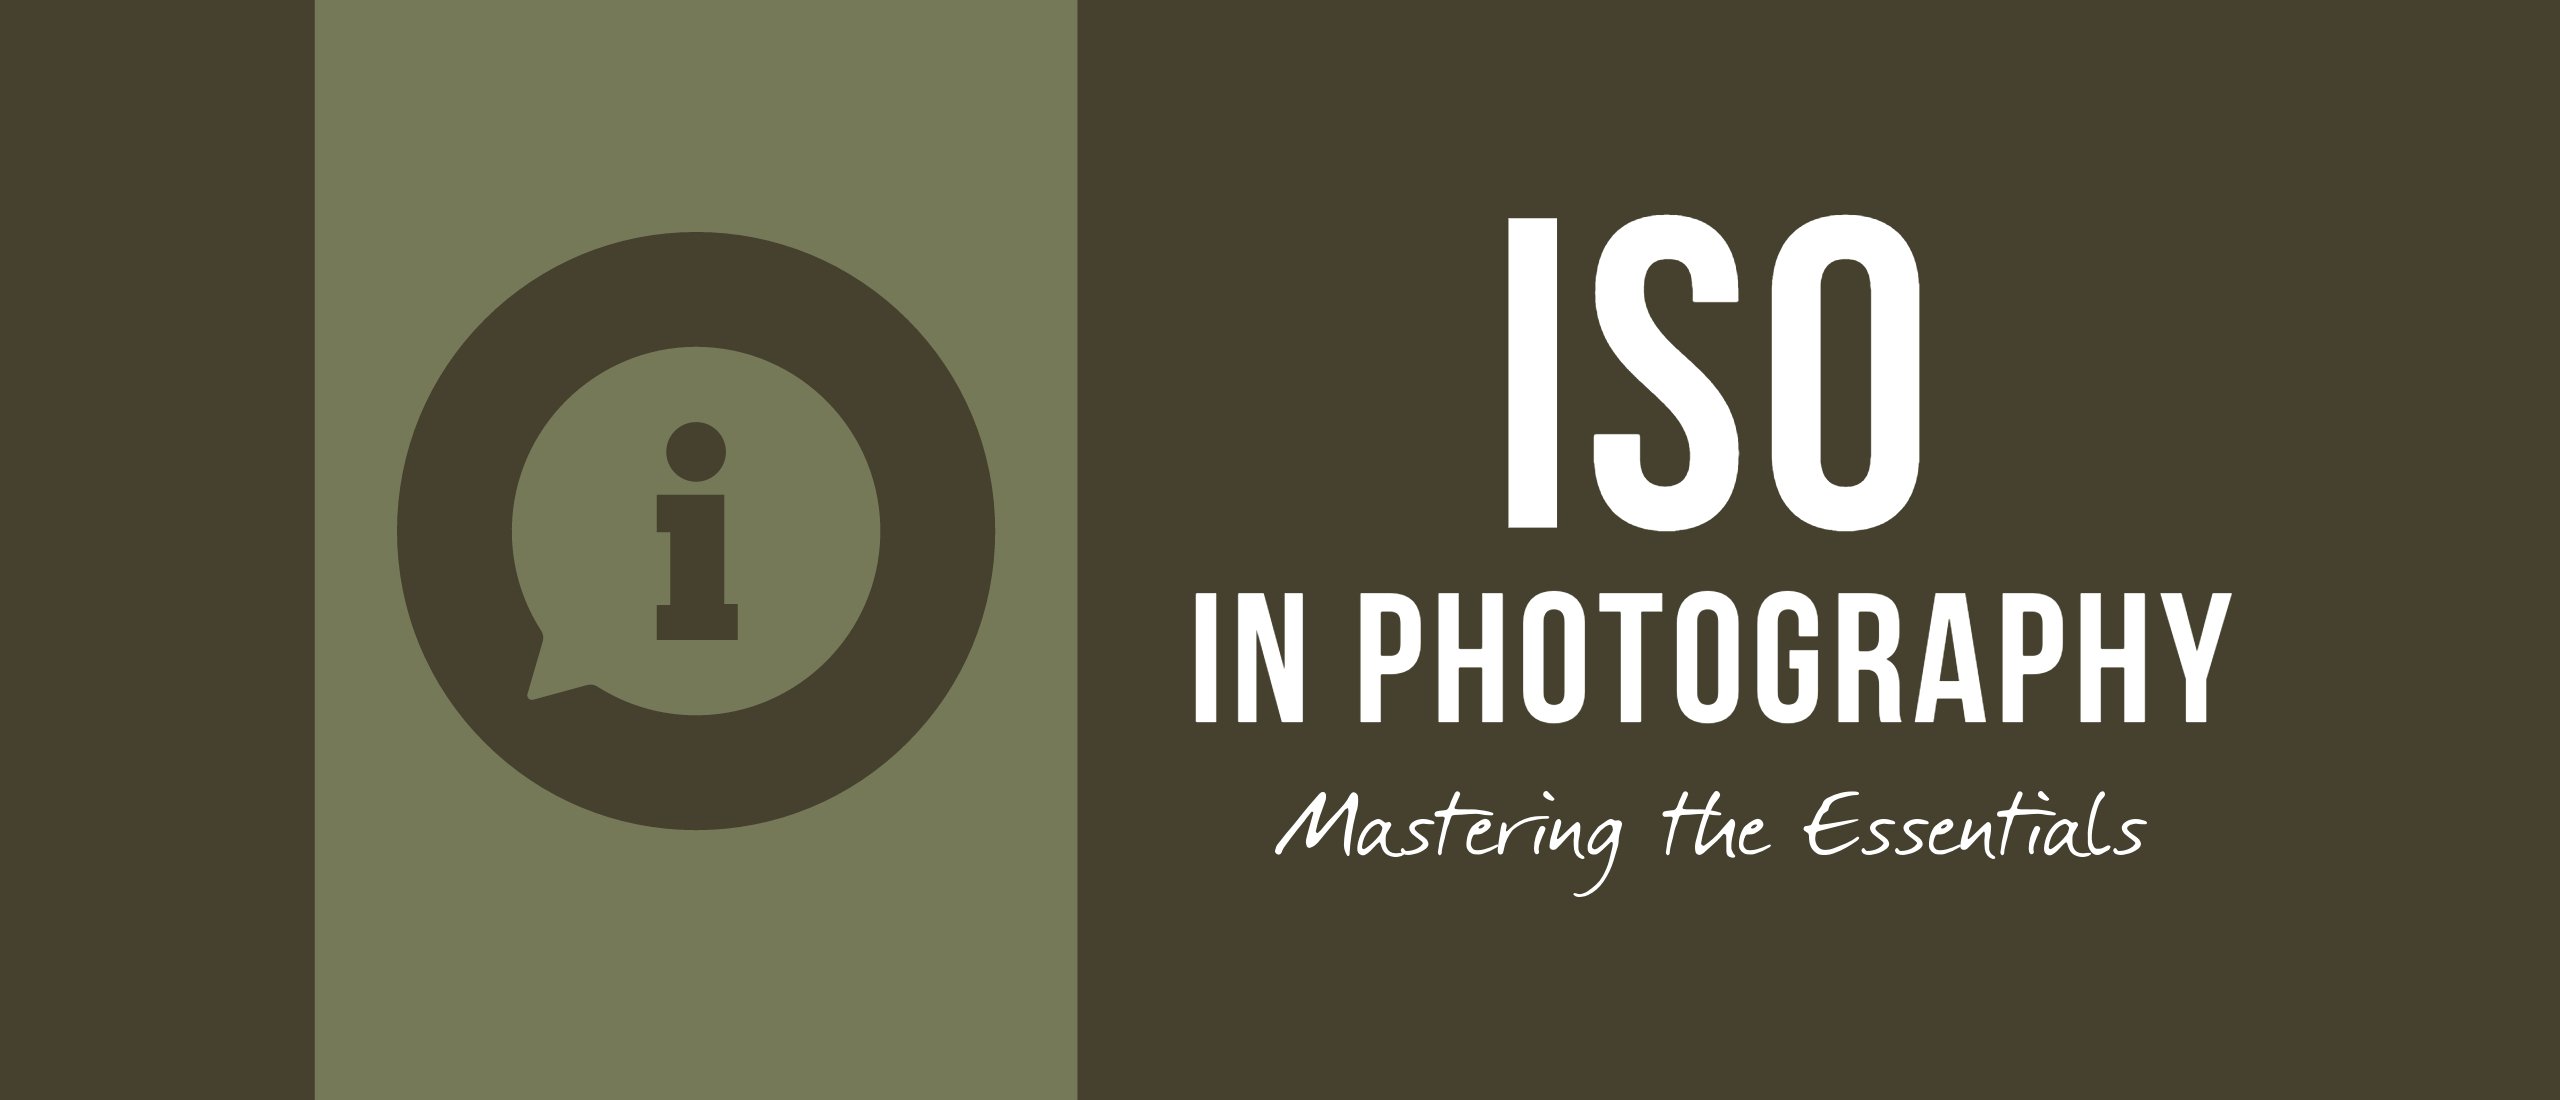 ISO in Photography: Mastering the Essentials